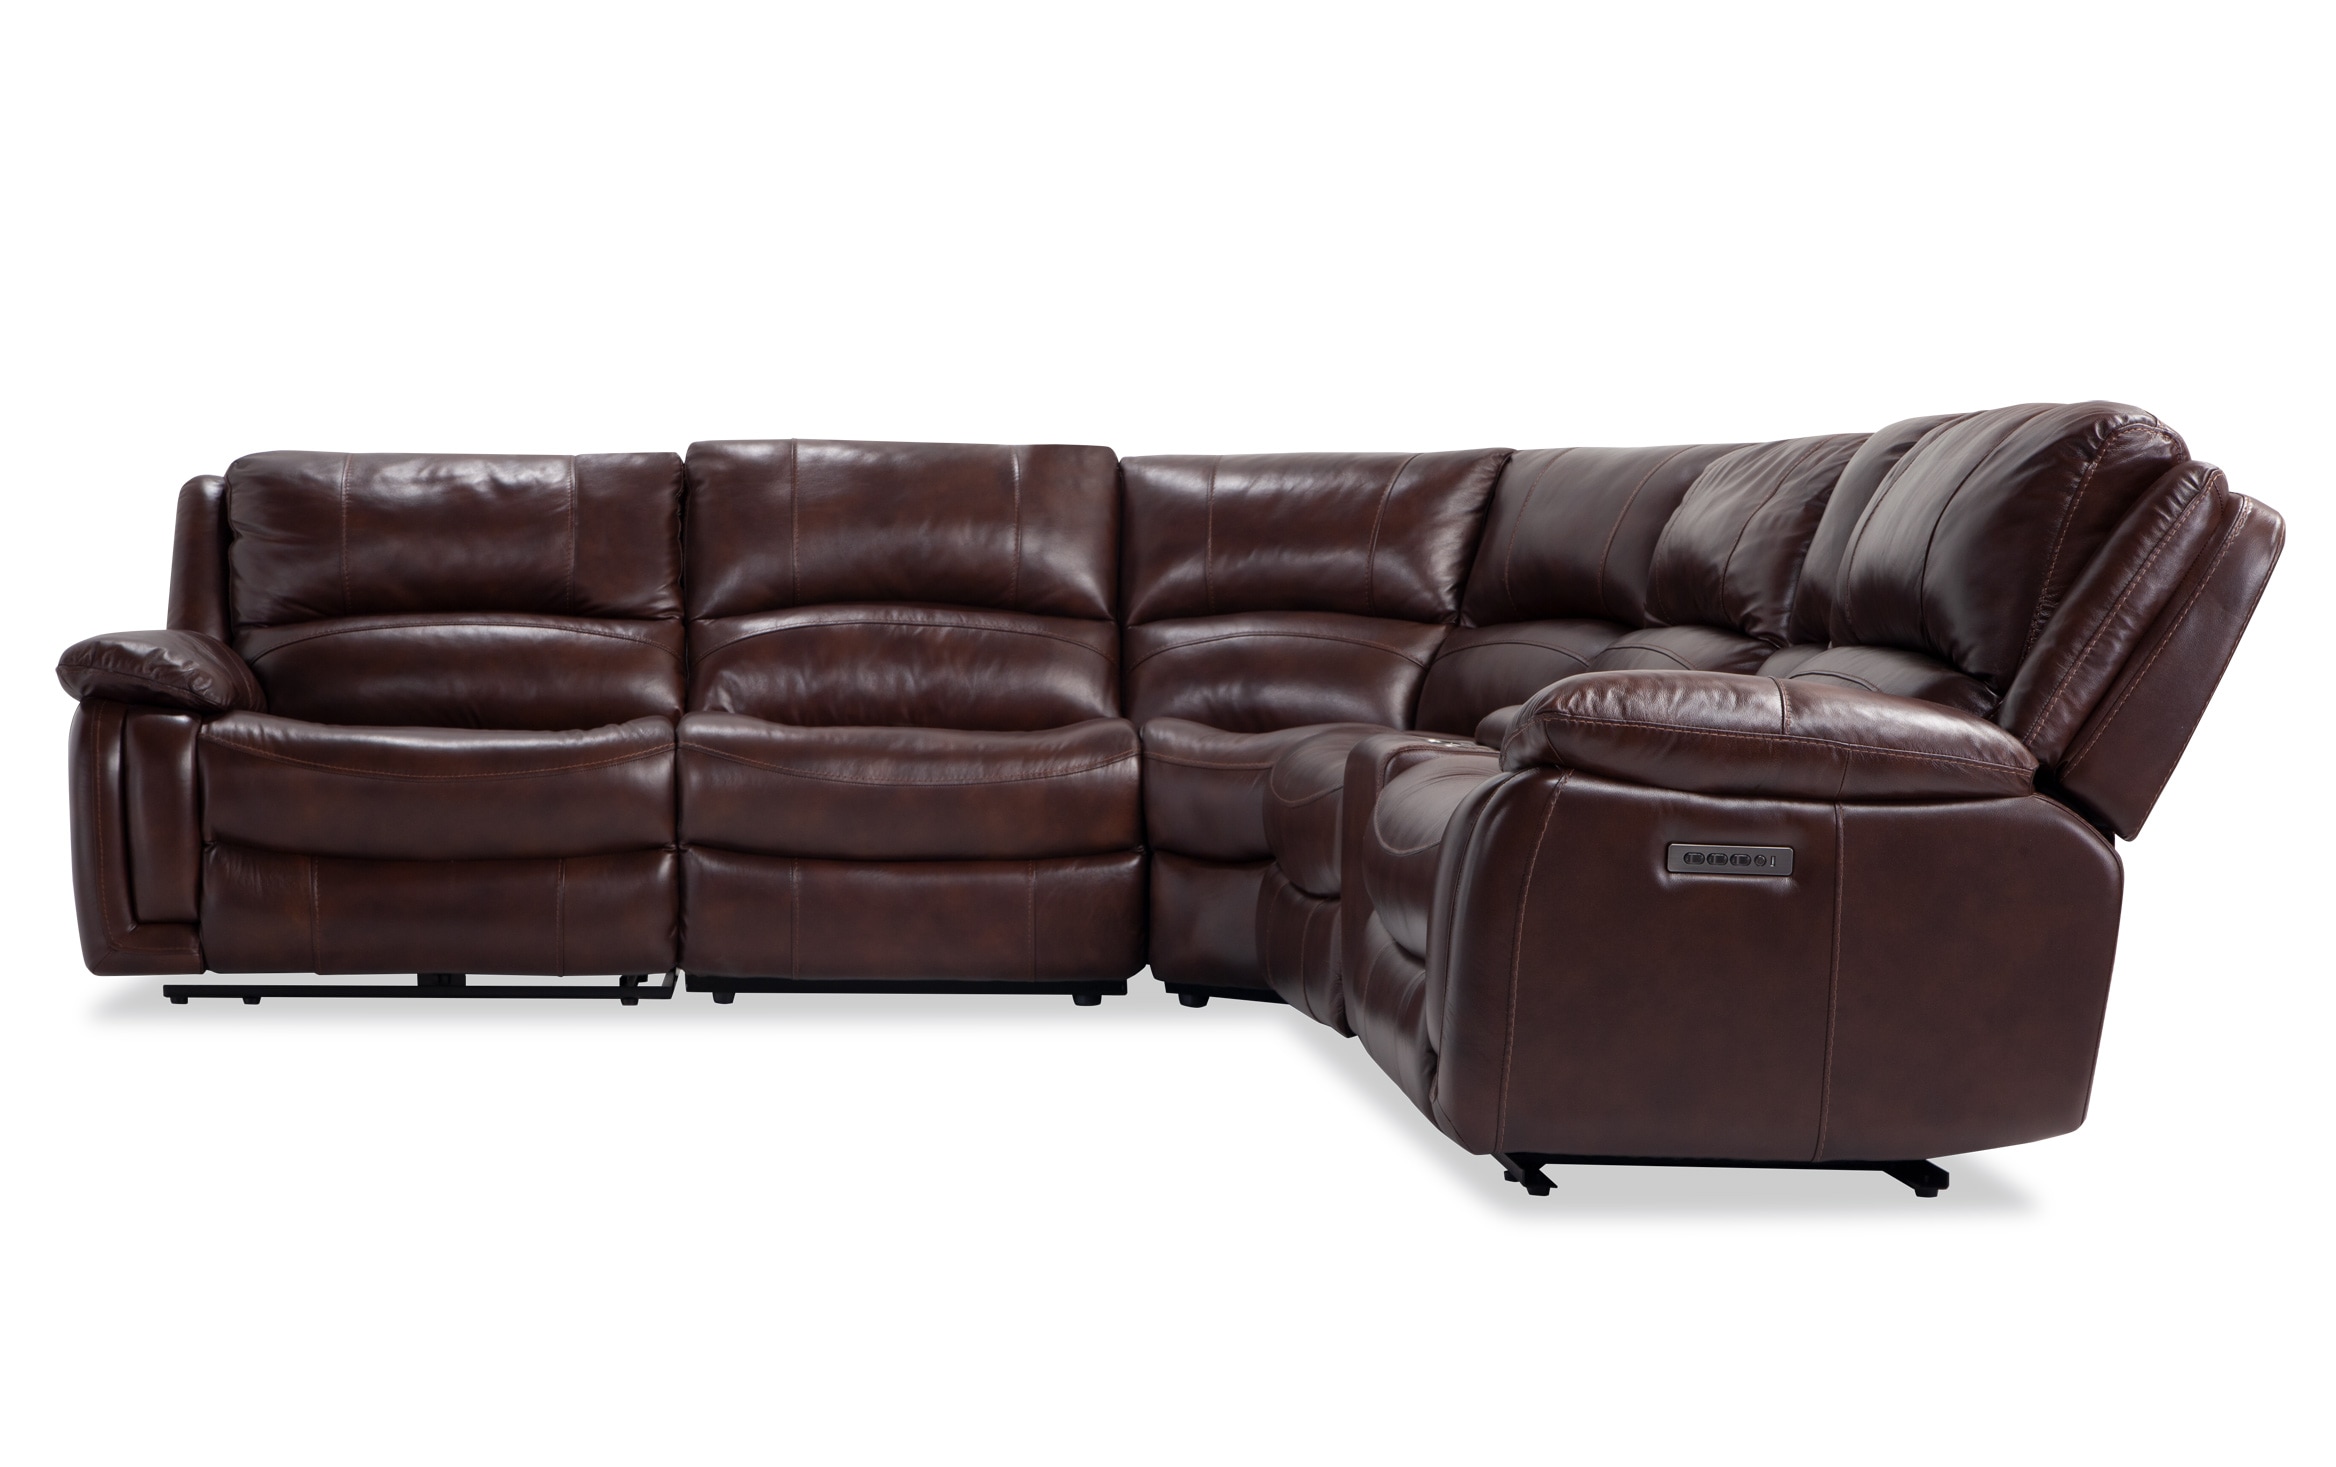 6 Piece Power Reclining Sectional, Leather Sectional Chaise Recliner